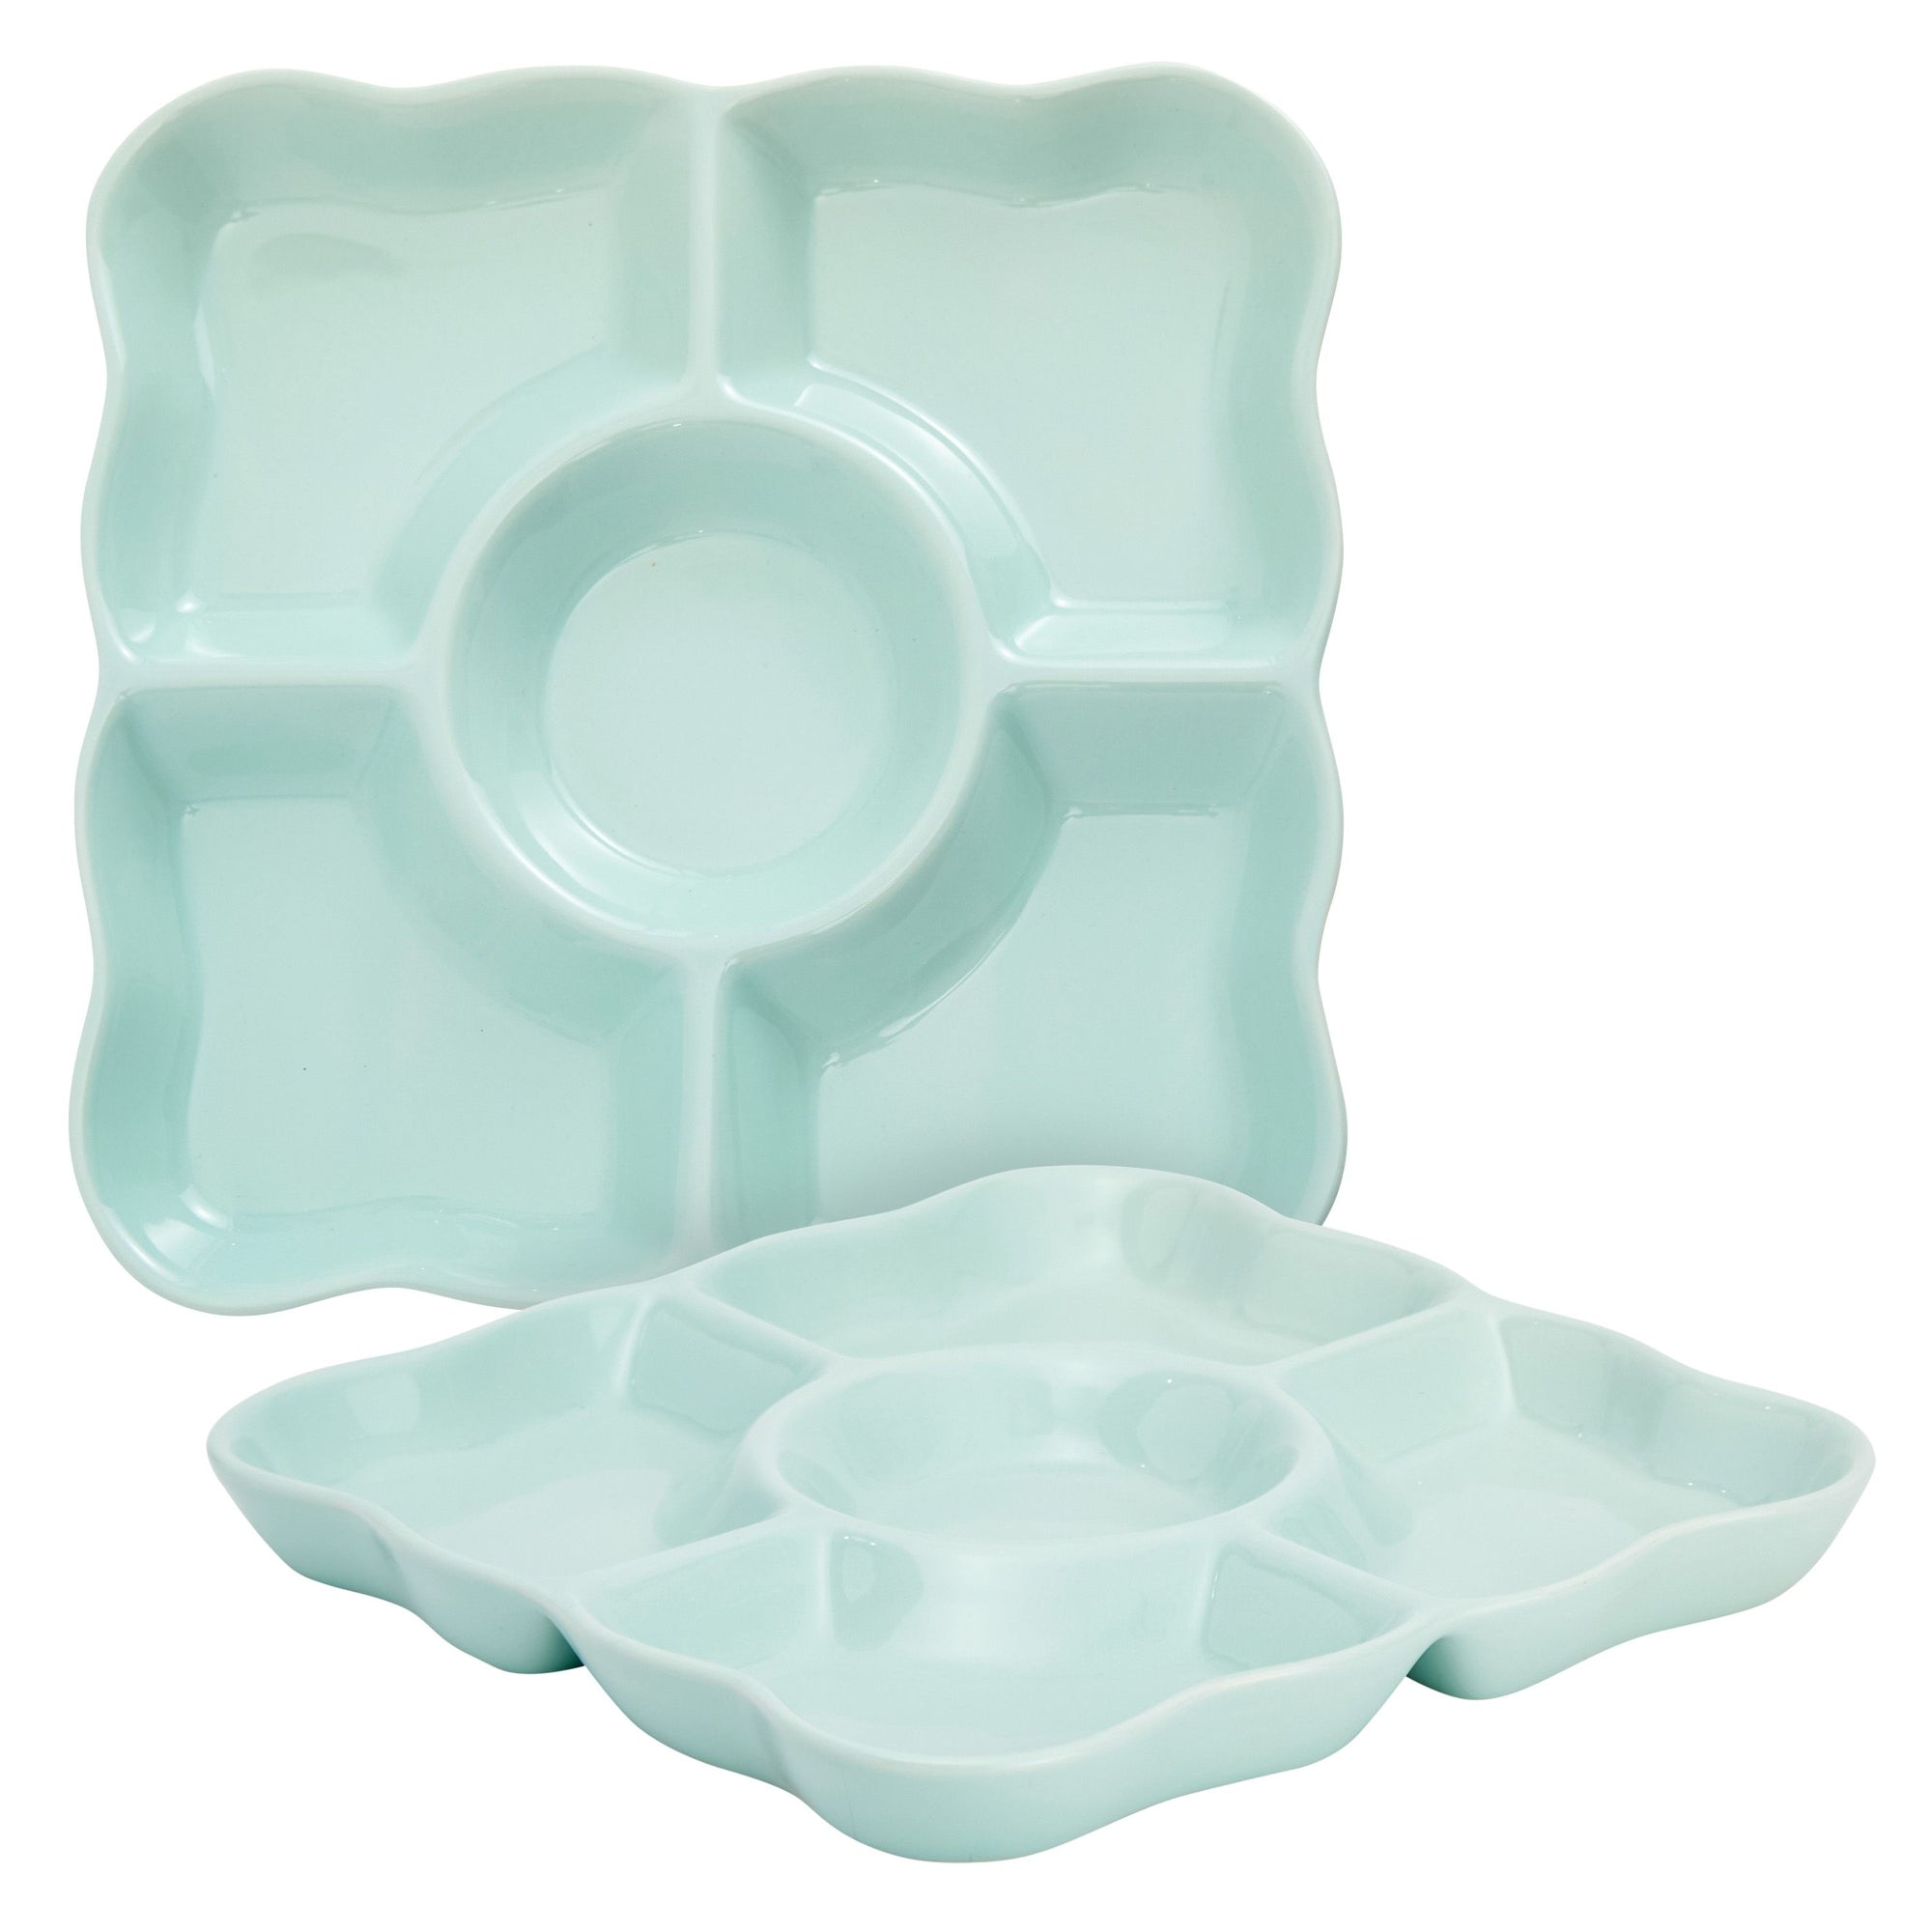 Plastic Divided Serving Platter Trays with Lids (Light Blue, 2